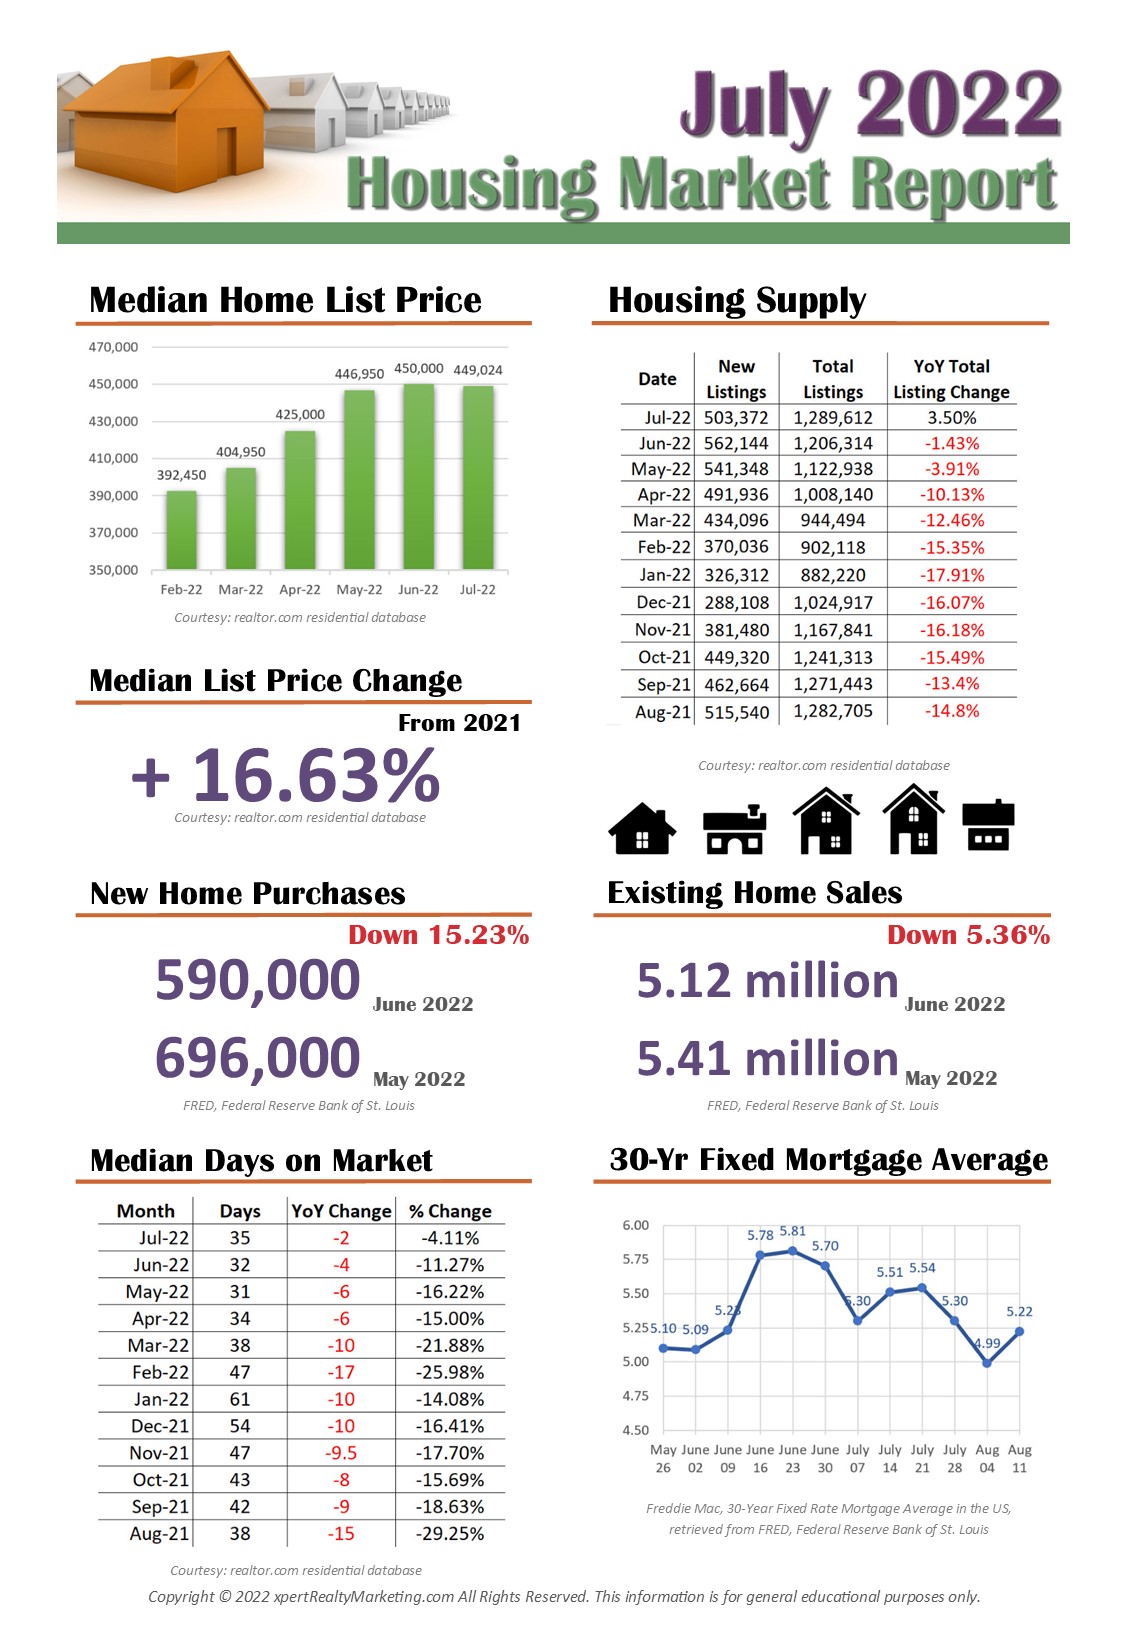 July 2022 Housing Market Report Infographic